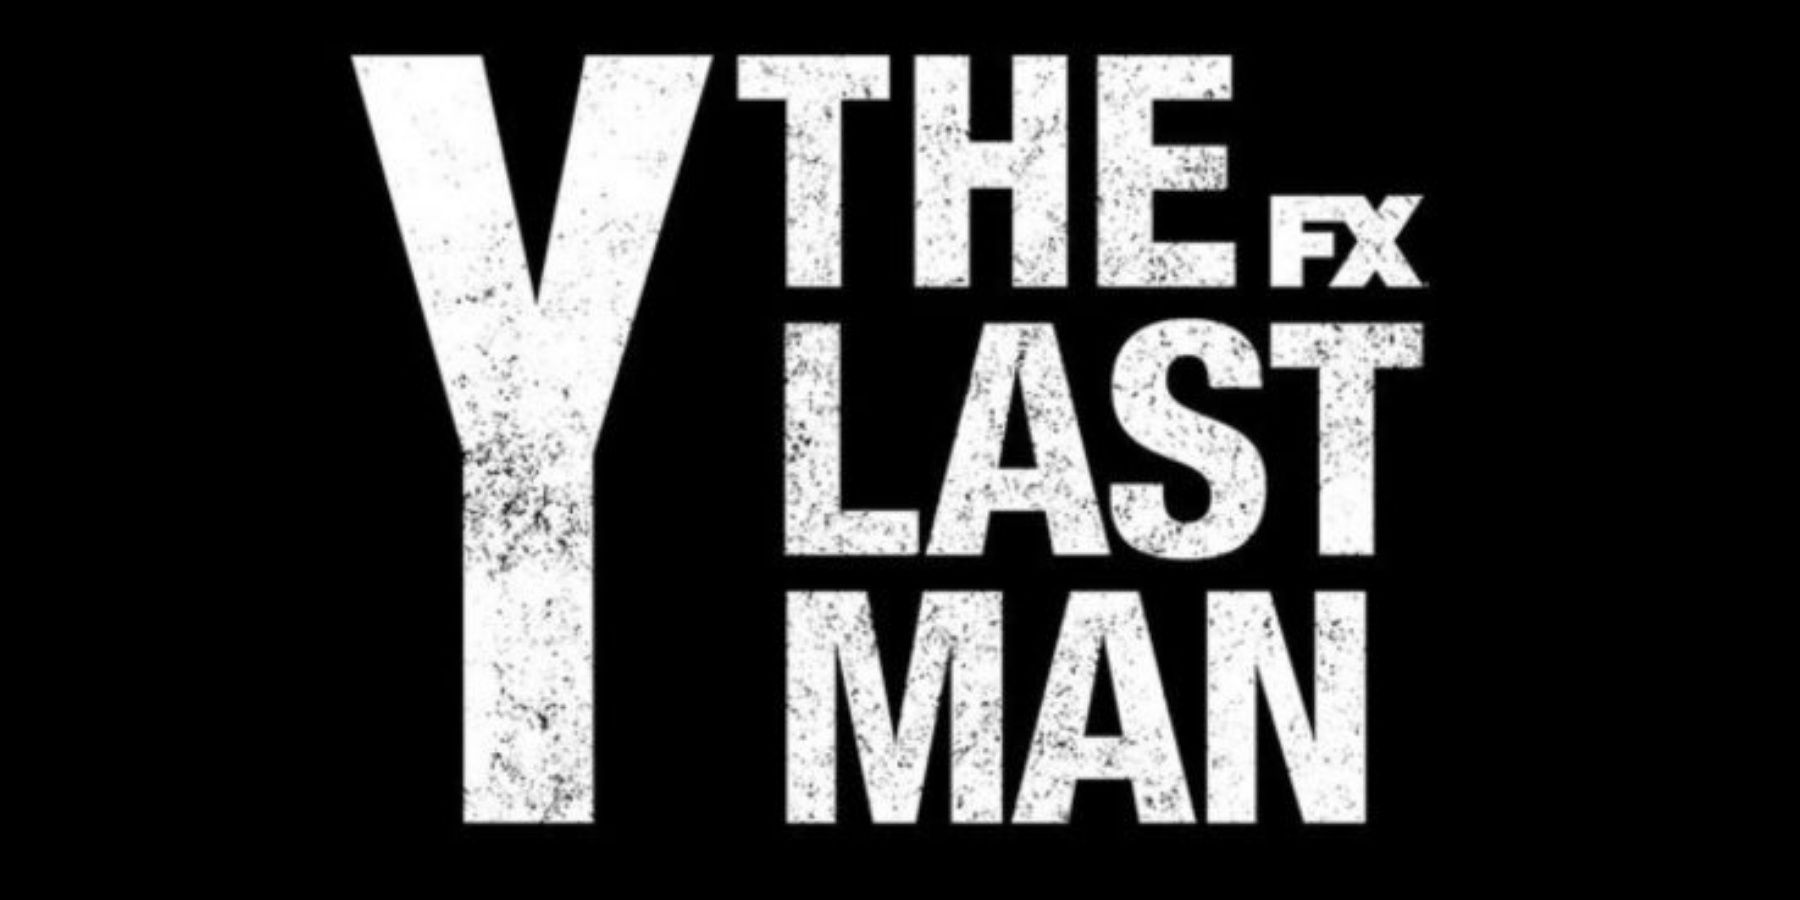 Y The Last Man FX title